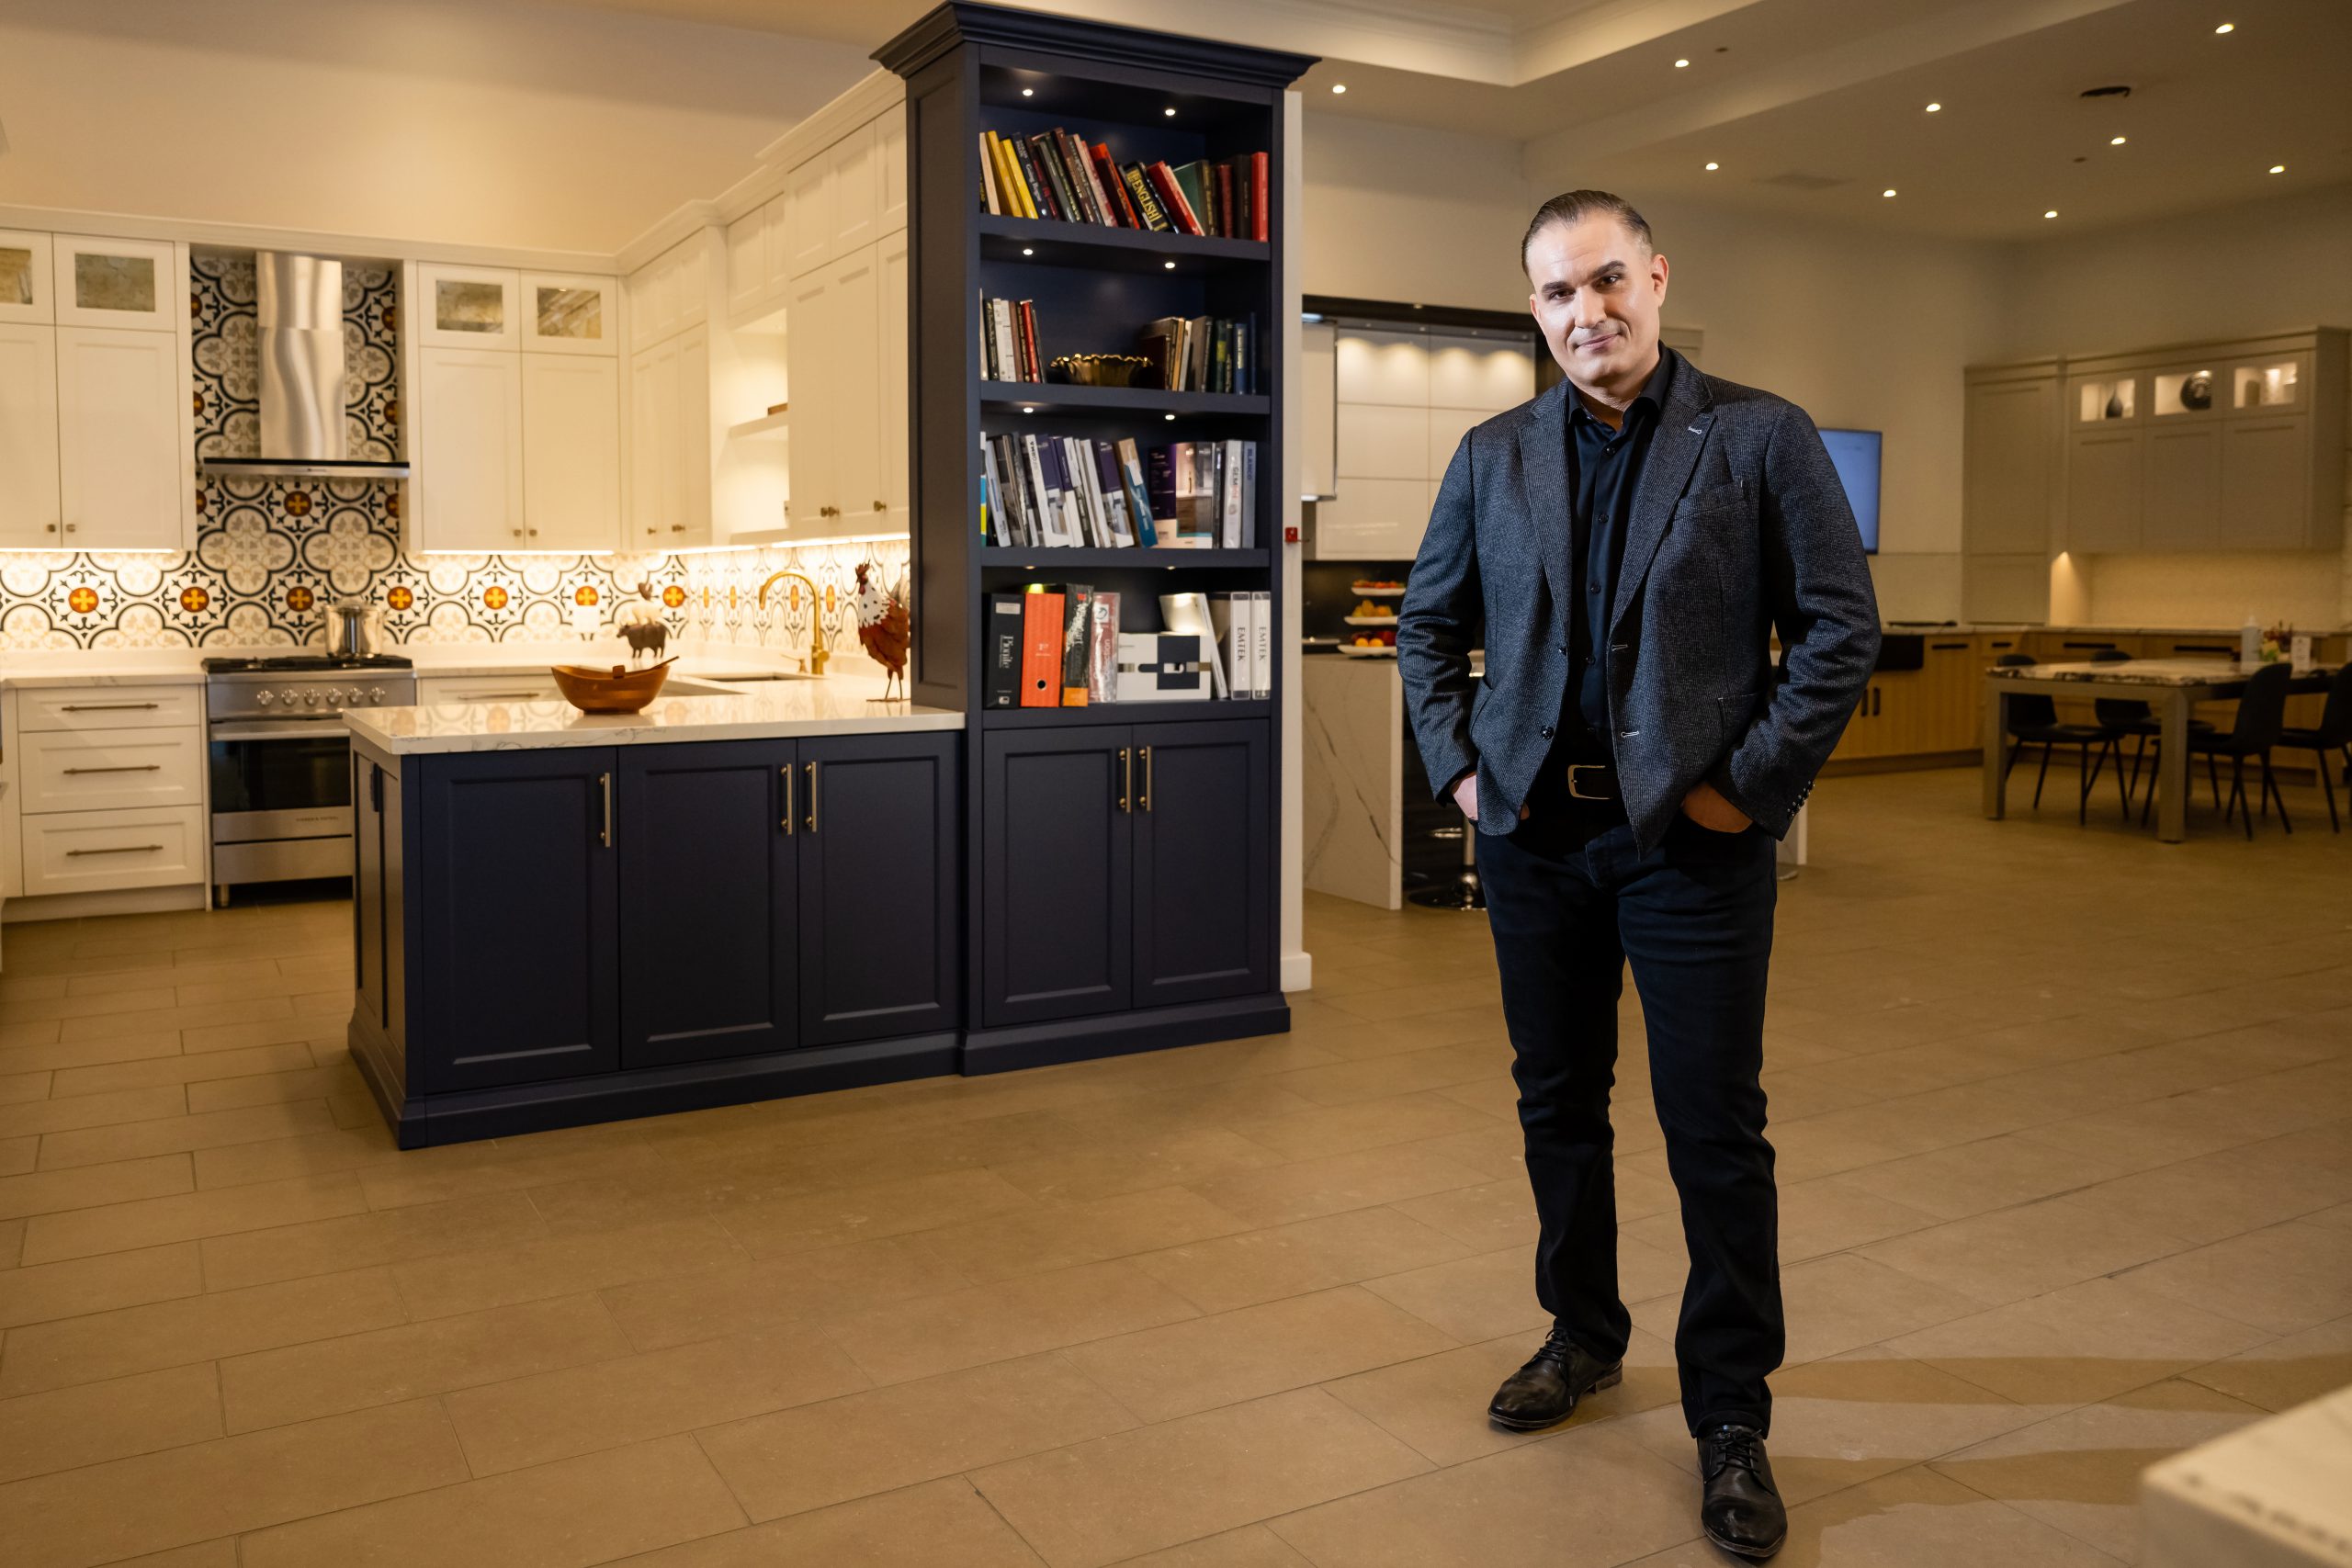 Louie Katsis, co-owner of Olympic Kitchens